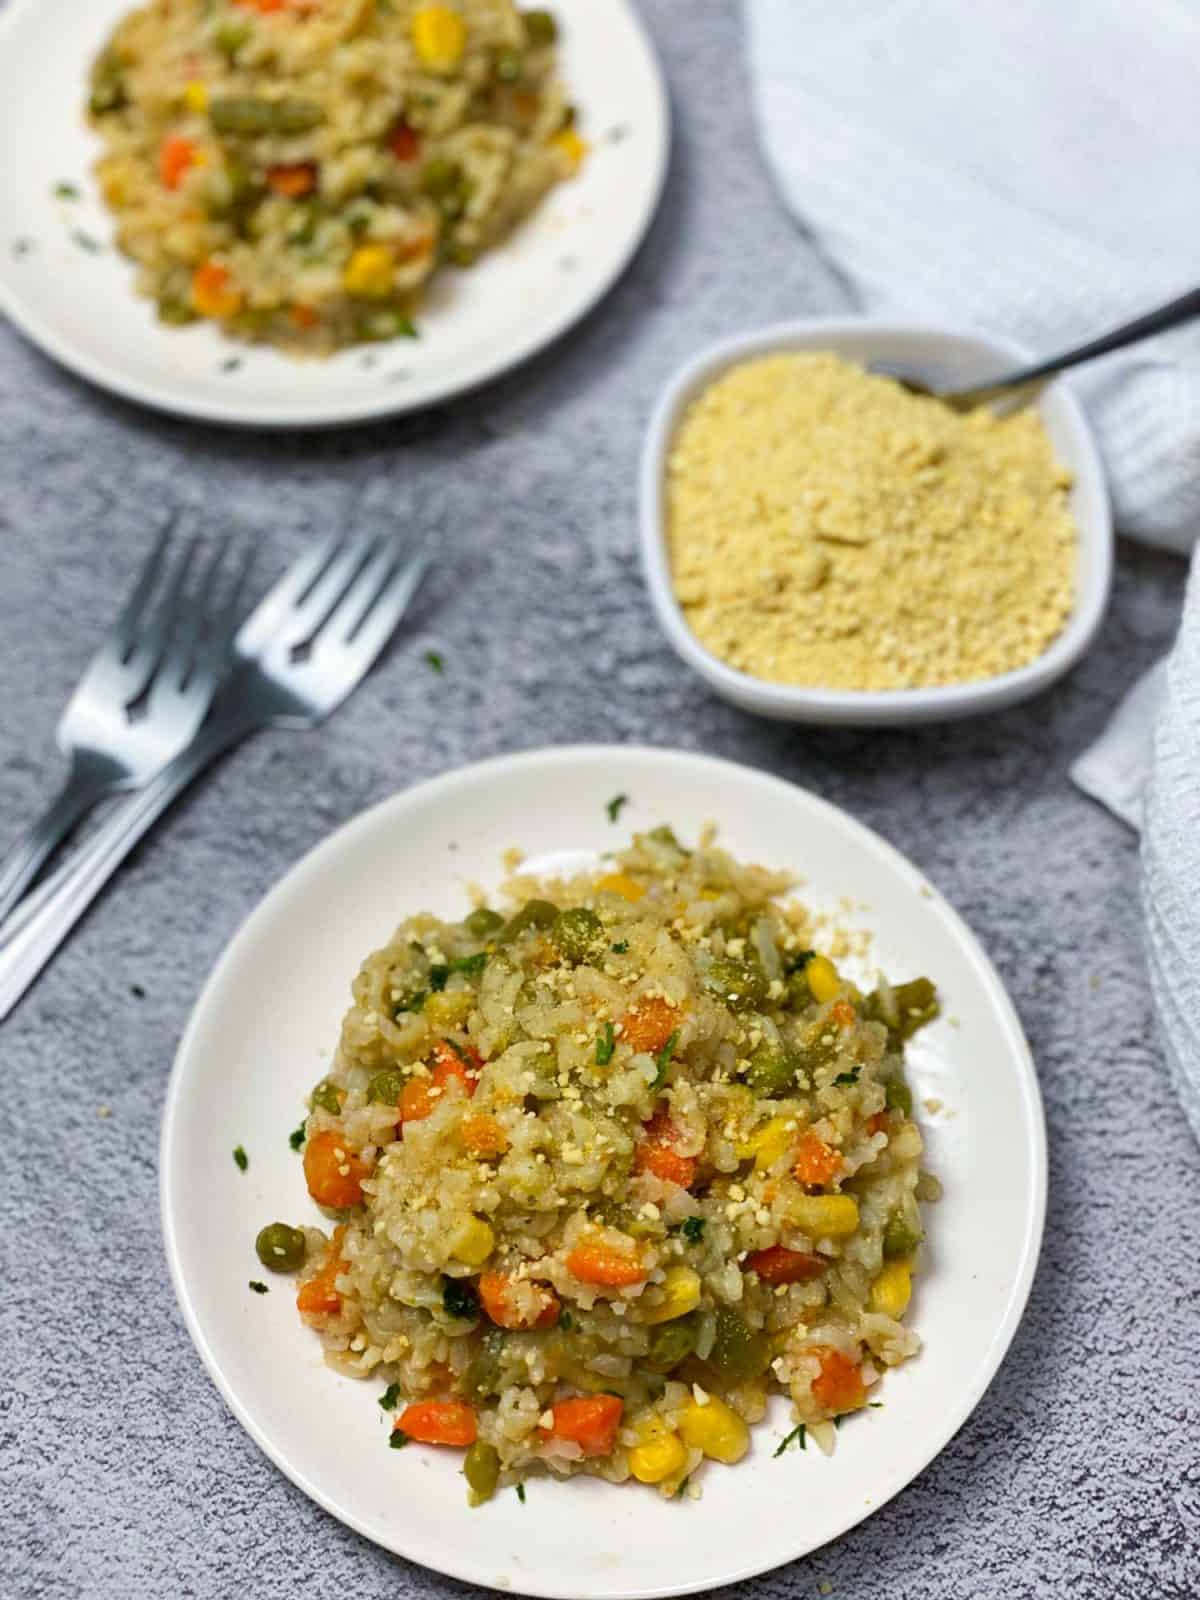 plate of vegetable brown rice risotto with parsley and parmesan garnish